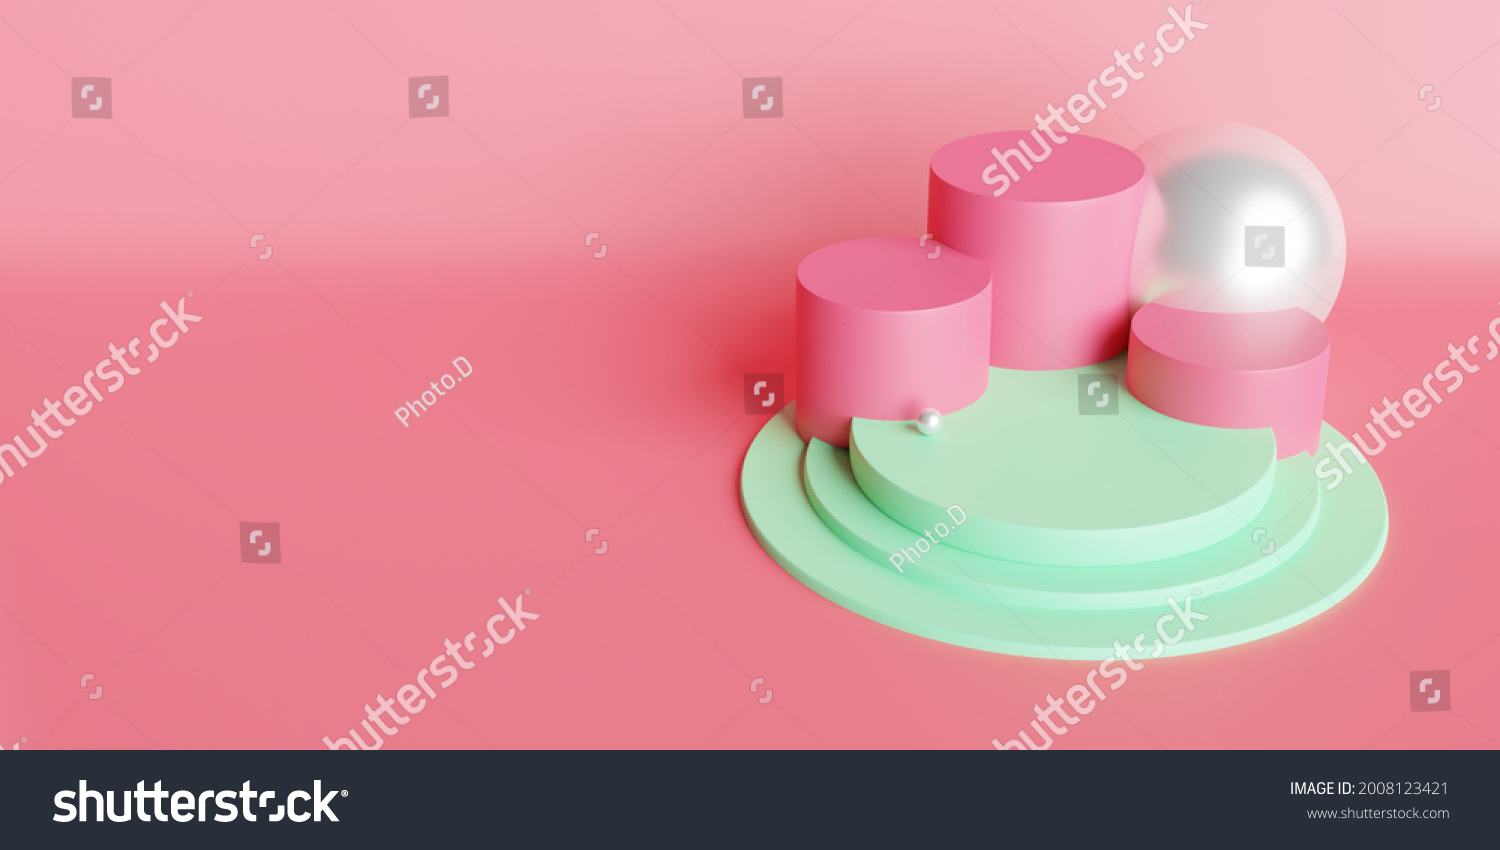 Product Display Podium Pink Abstract Background Stock Illustration ...